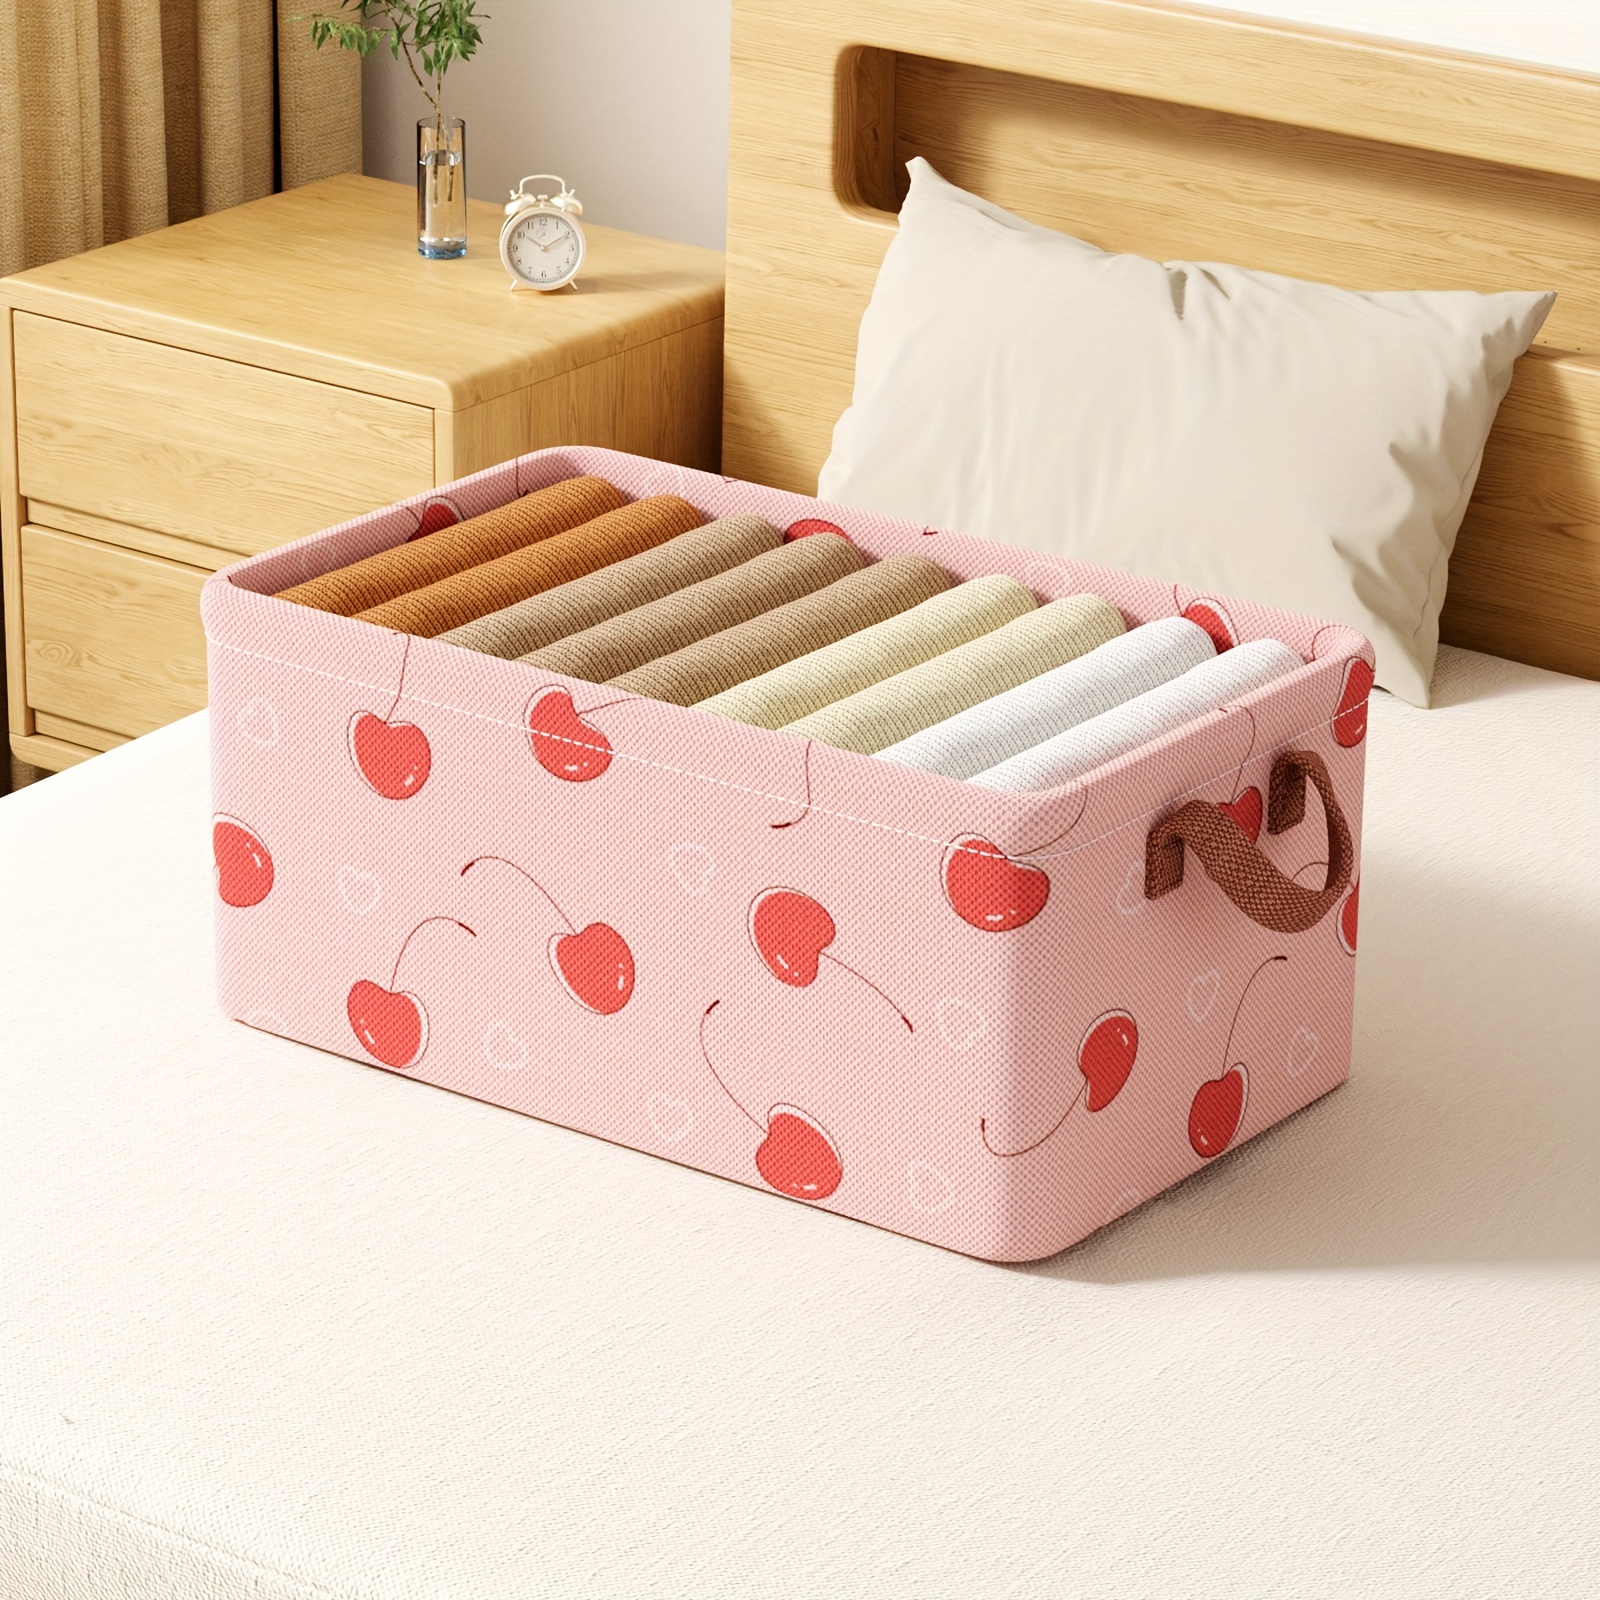 

1pc Love And Cherry Pattern Storage Basket, High Handle Deep Cabinet Storage Basket, With Steel Frame, Can Be Used In Wardrobe, Laundry, Bedroom Storage Shirts, Jeans, Snacks, Toys, Books, Etc